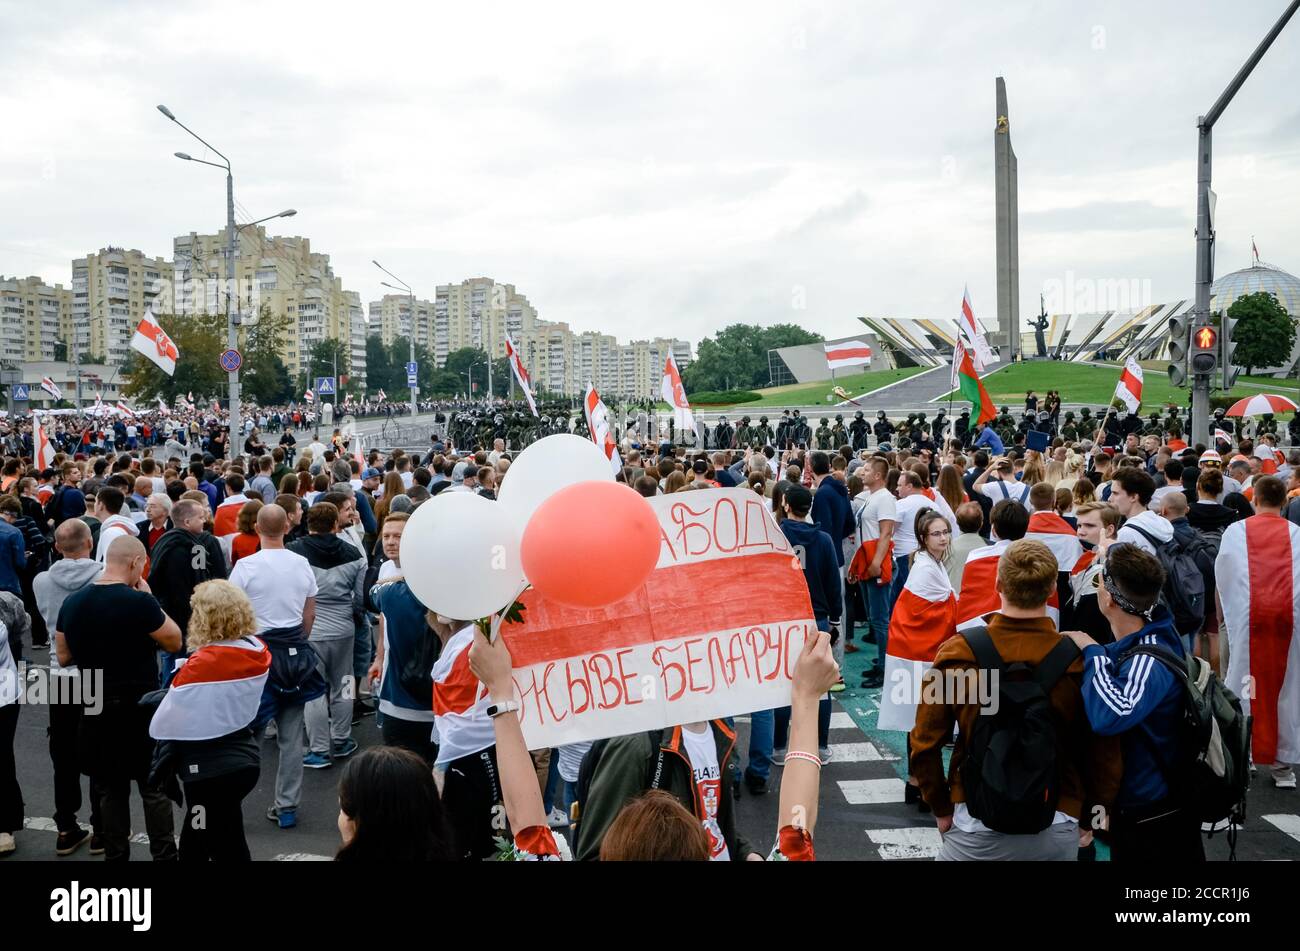 Minsk, Belarus - August 23, 2020: Belarusian people participate in peaceful protest after presidential elections in Belarus Stock Photo